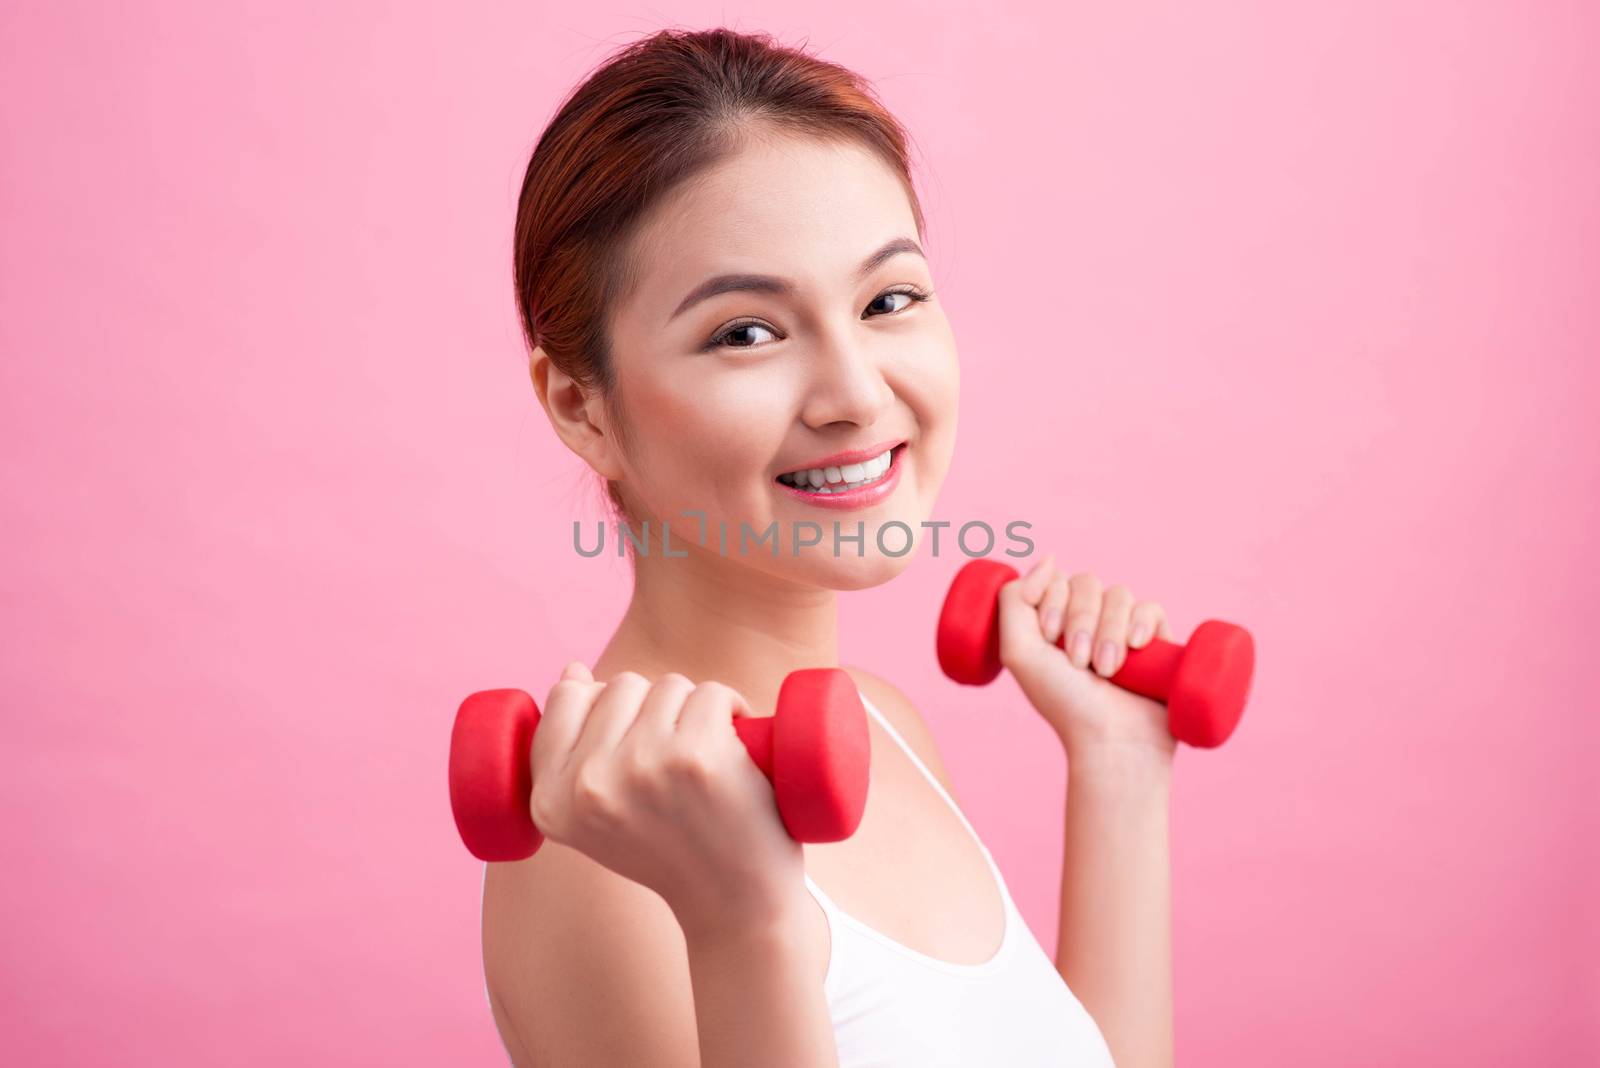 Woman Lifting Weights. Fitness woman lifting weights smiling hap by makidotvn